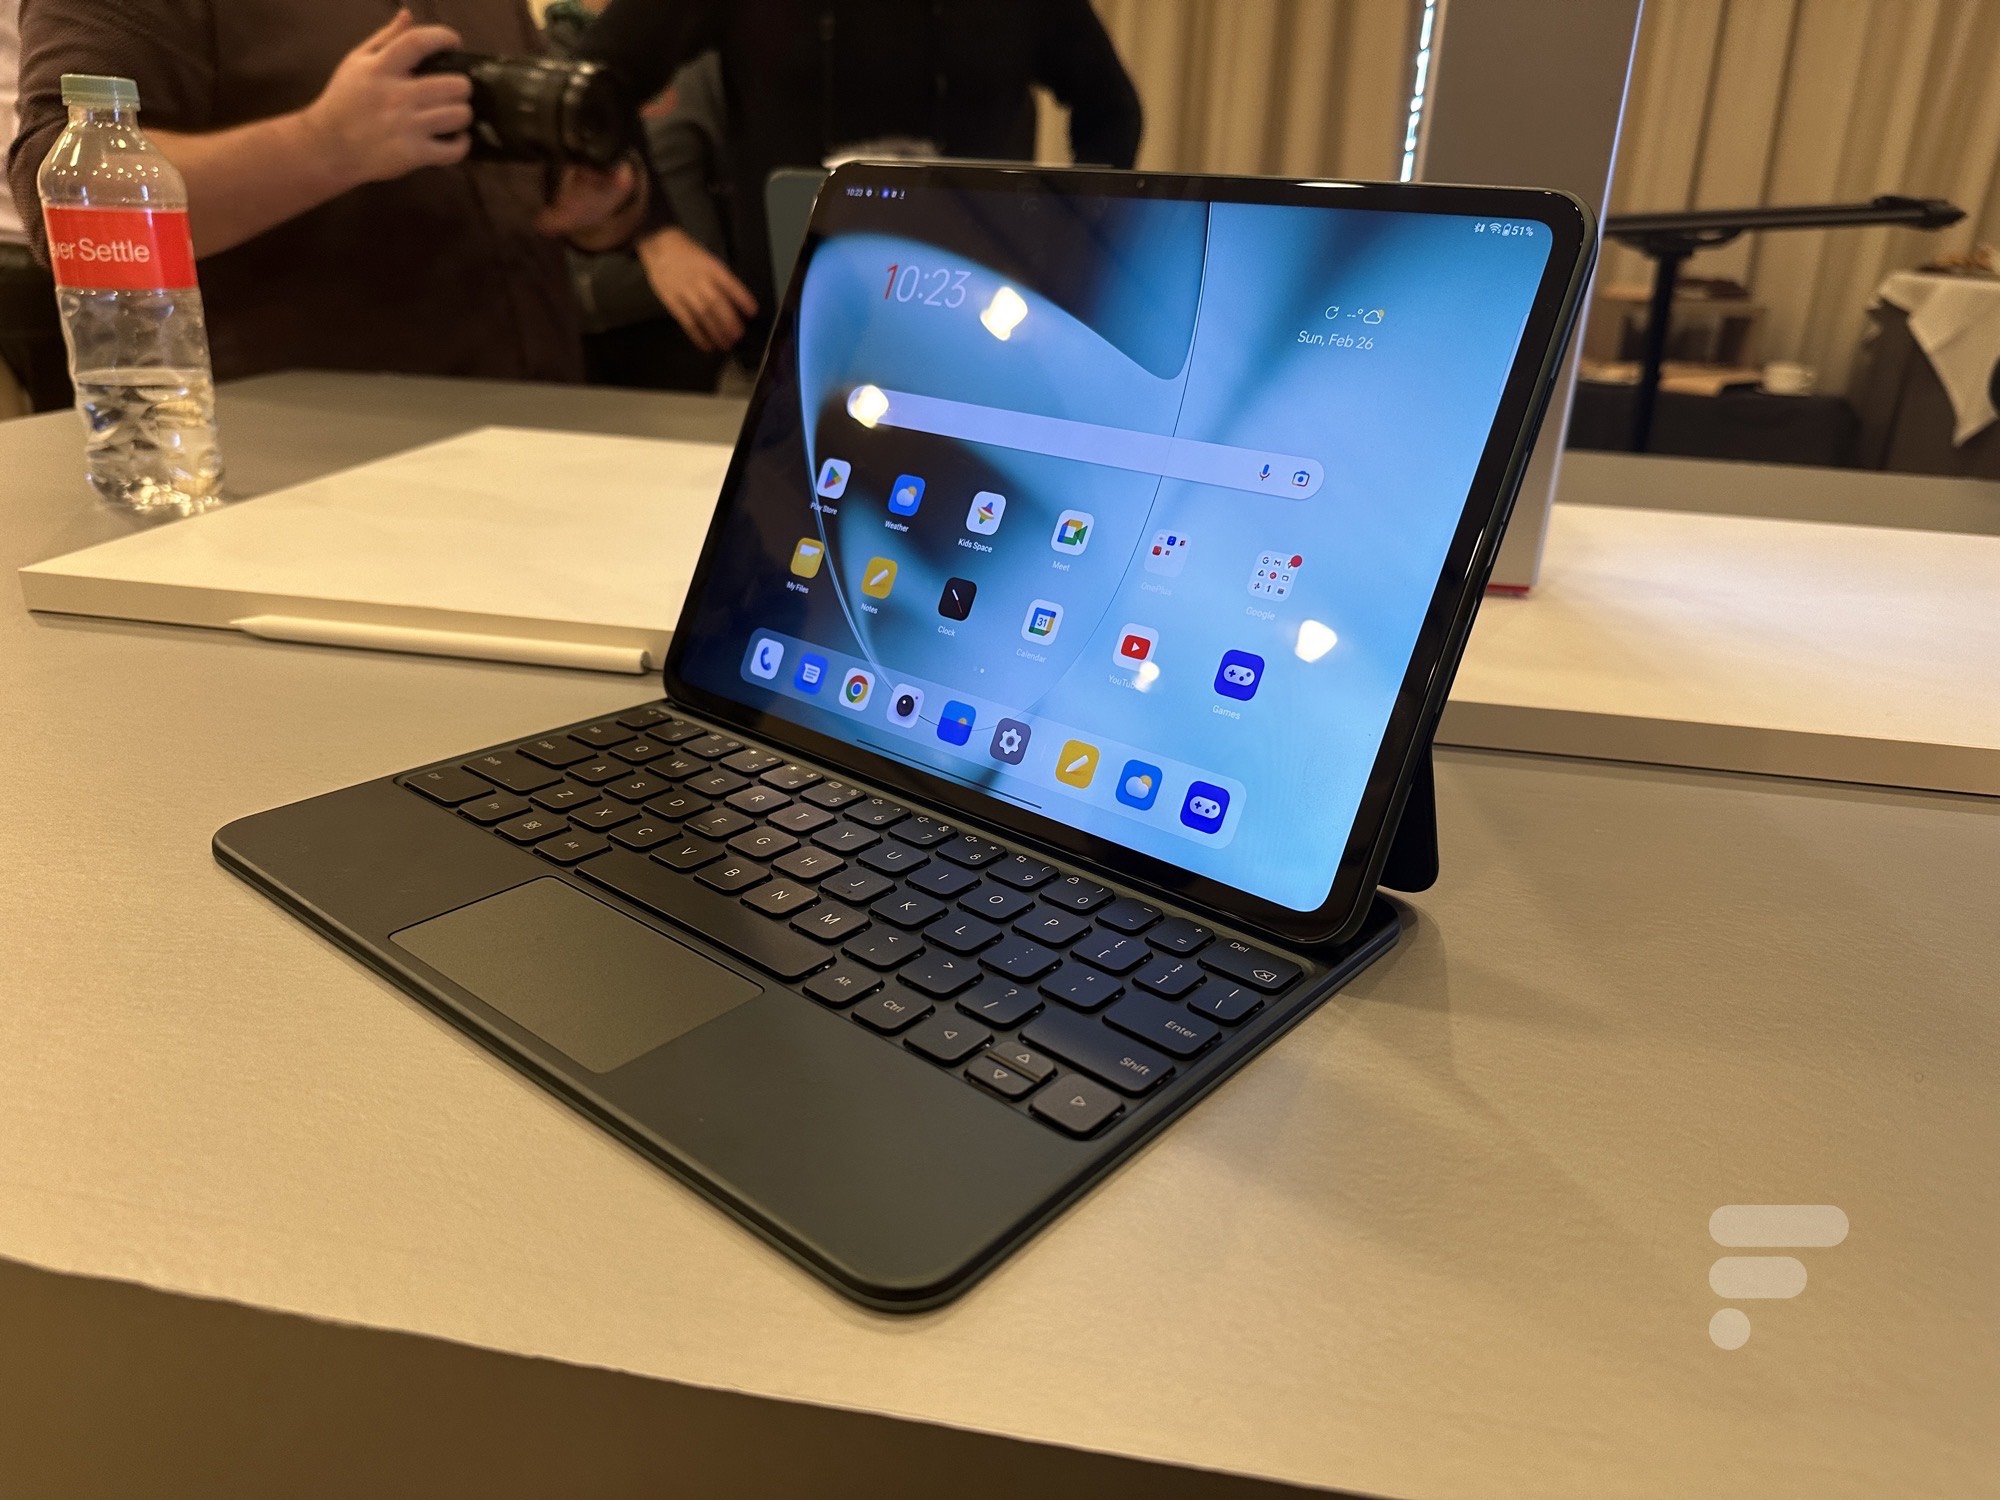 the brand’s first tablet is already doing well